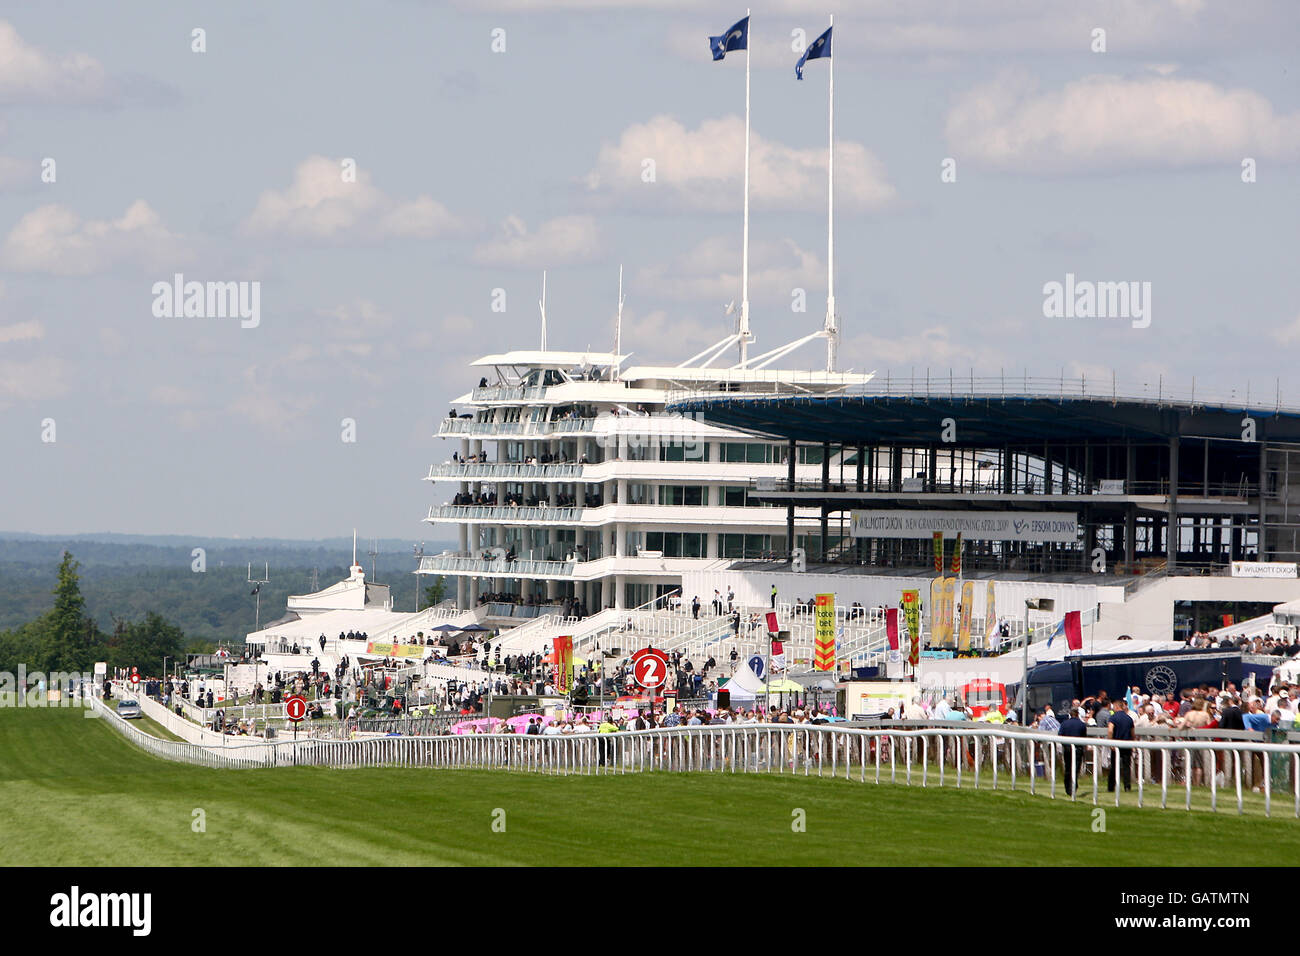 Horse Racing - The 2008 Derby Festival - Derby Day - Epsom Downs Racecourse. A view of Epsom Downs Racecourse Stock Photo